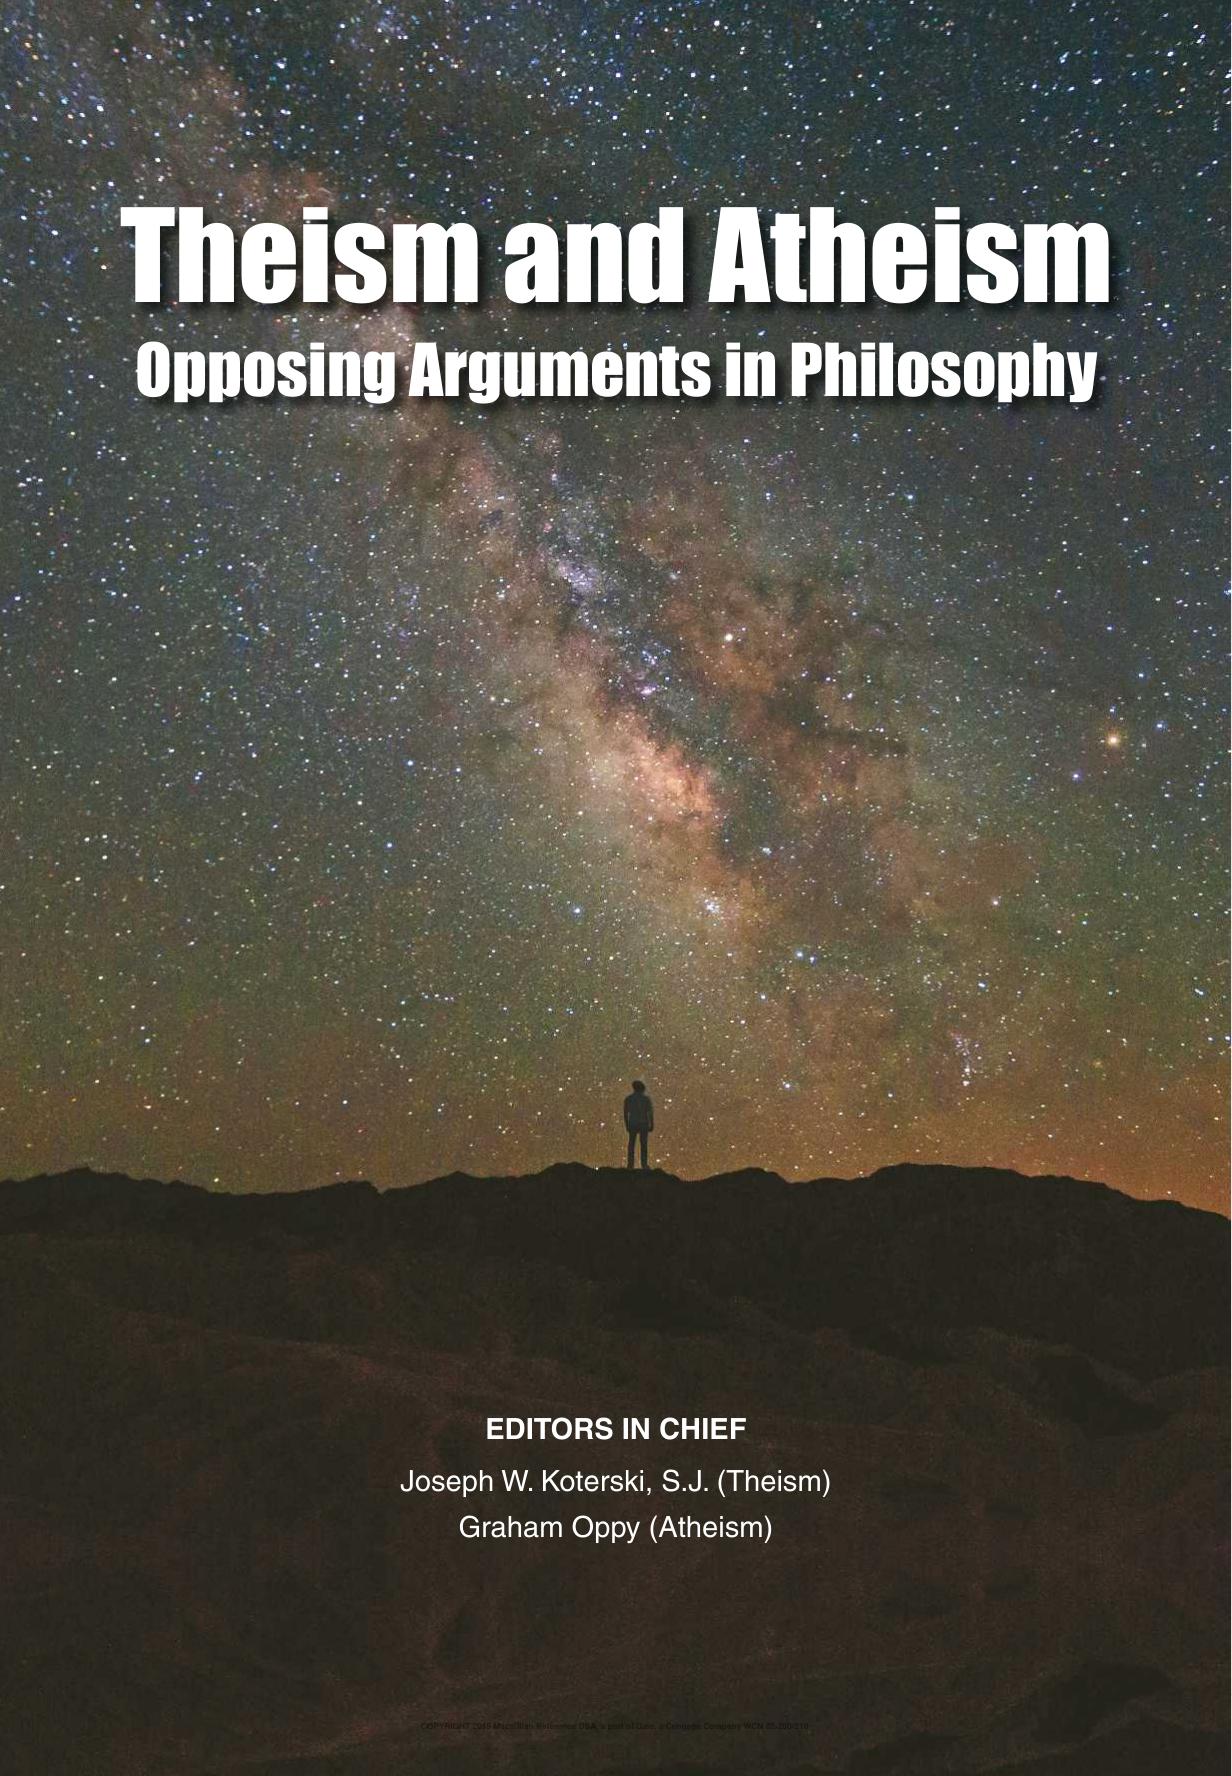 Theism and Atheism: Opposing Arguments in Philosophy